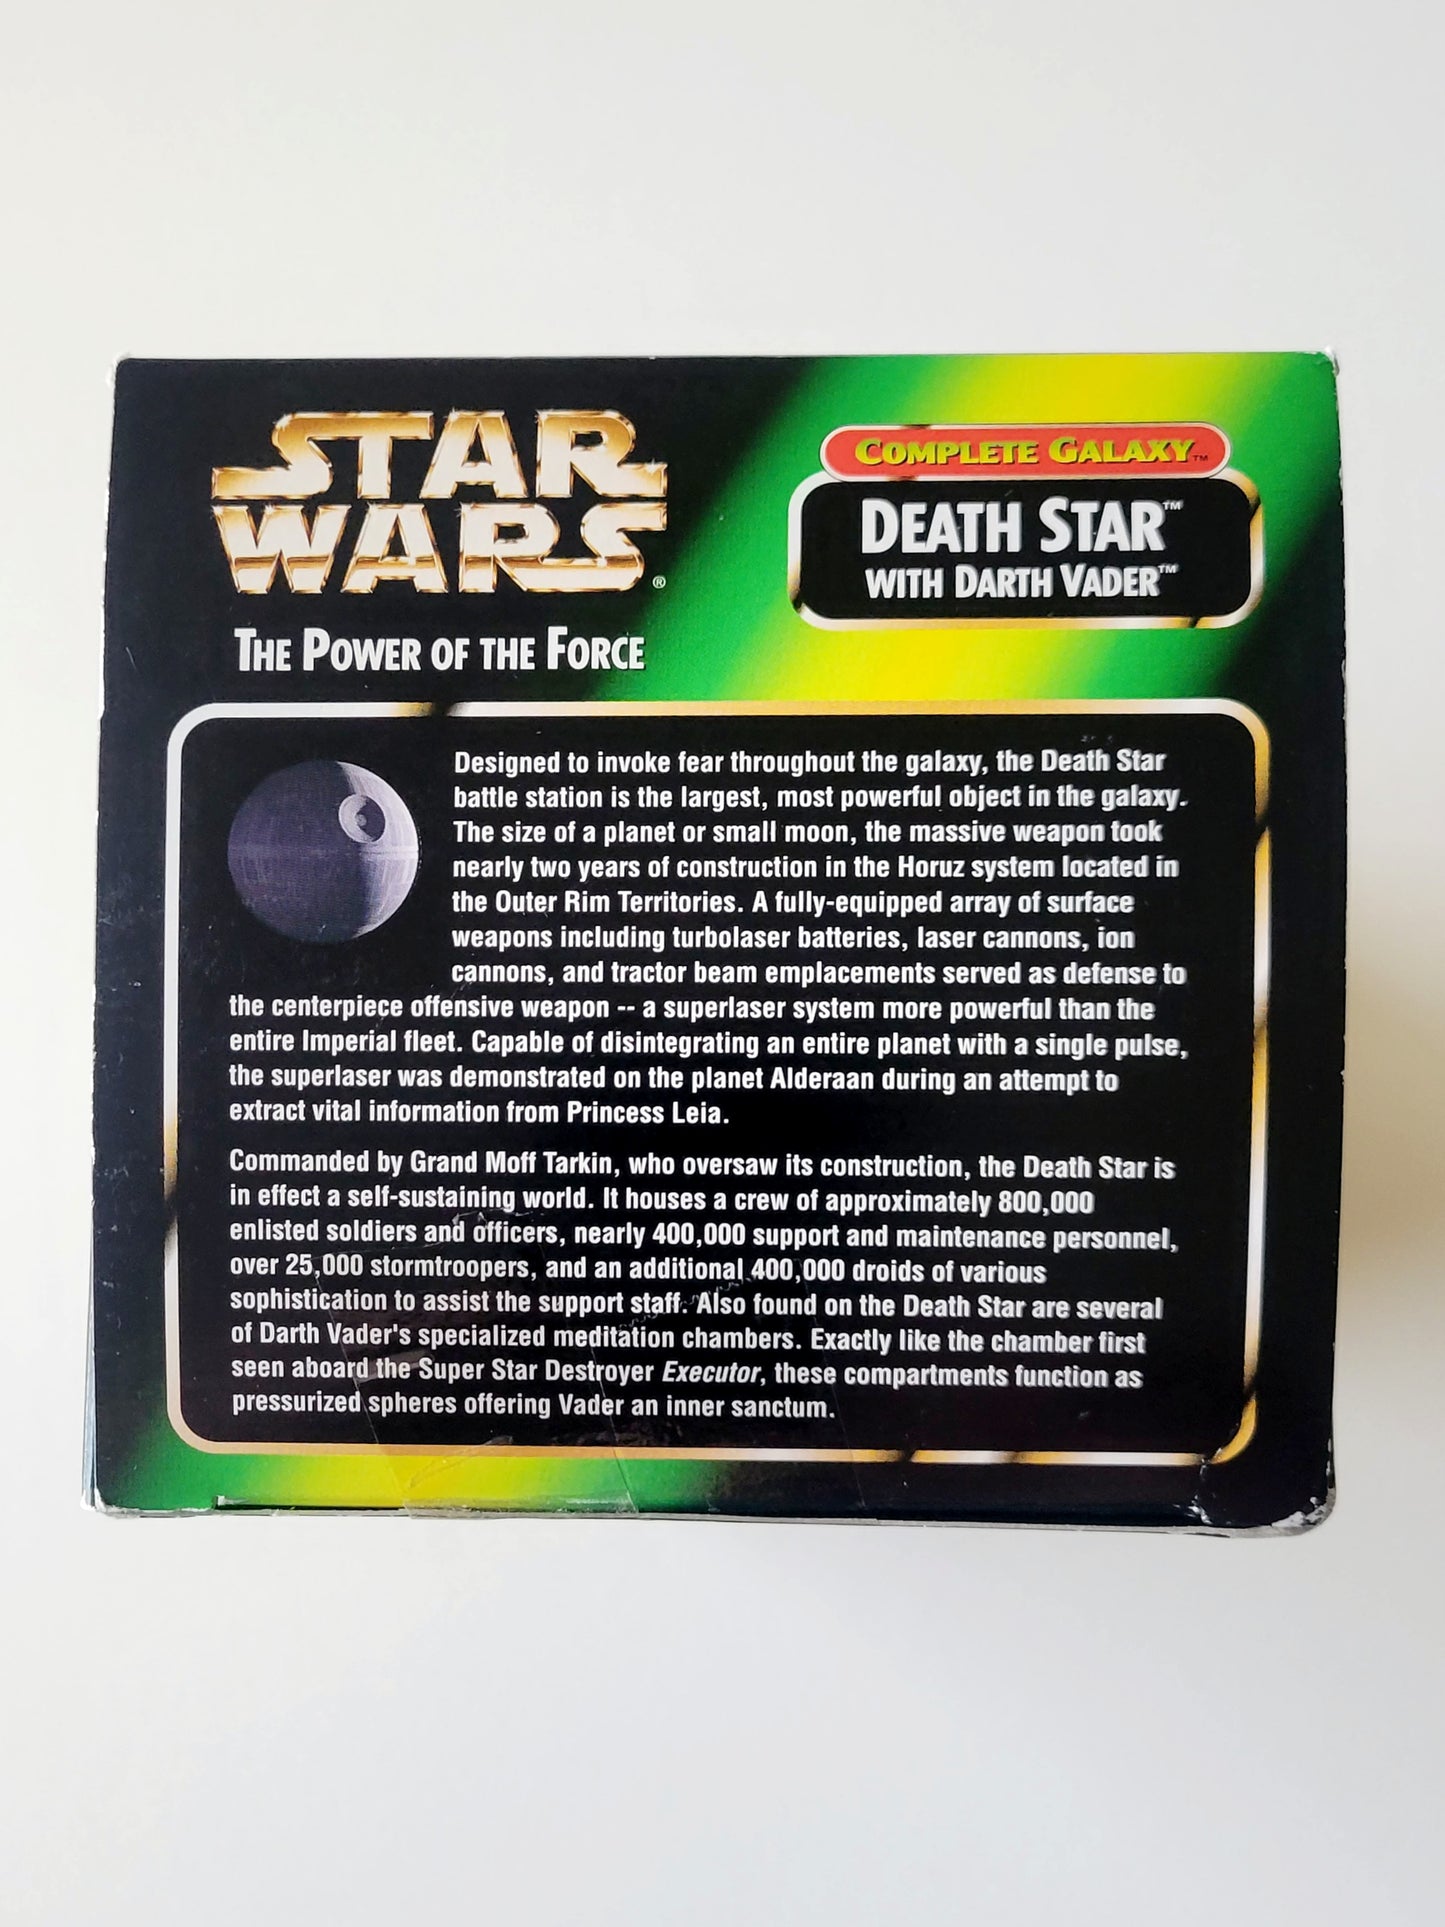 Star Wars: Power of the Force Complete Galaxy Death Star with Darth Vader